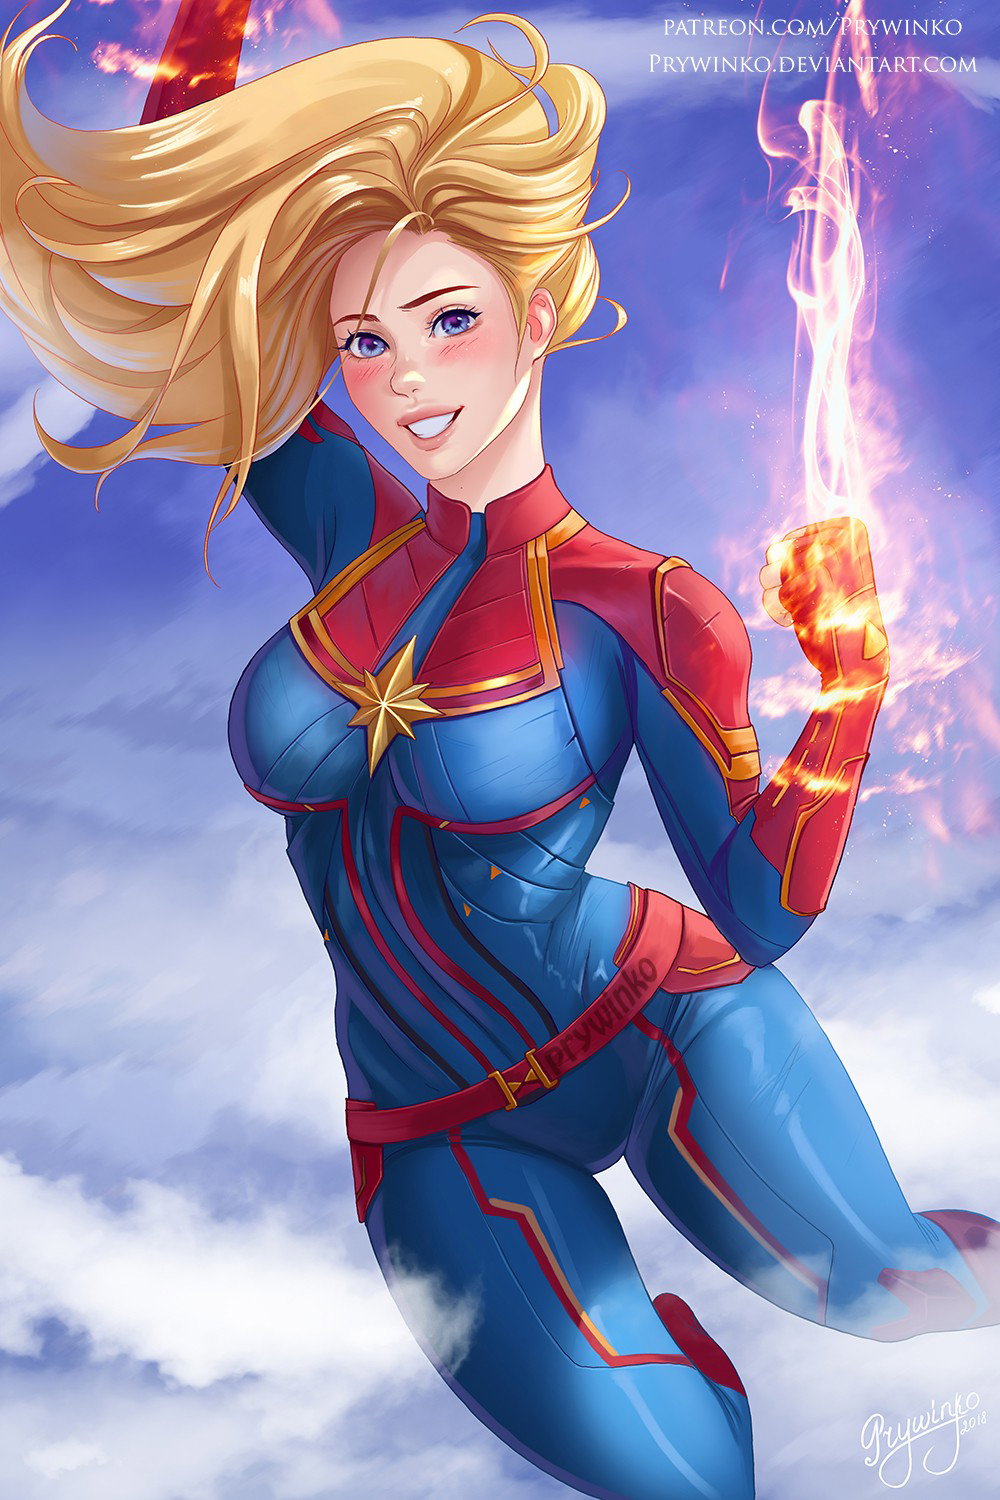 Photo by Justanotherguy with the username @Justanotherguy79,  September 28, 2018 at 12:37 AM and the text says 'prywinko:


Captain Marvel 
 Hi-res, sfw/nsfw, wallpapers, psd  on my https://www.patreon.com/Prywinko

#CaptainMarvel #marvel  #patreon #superhero #cute #art'